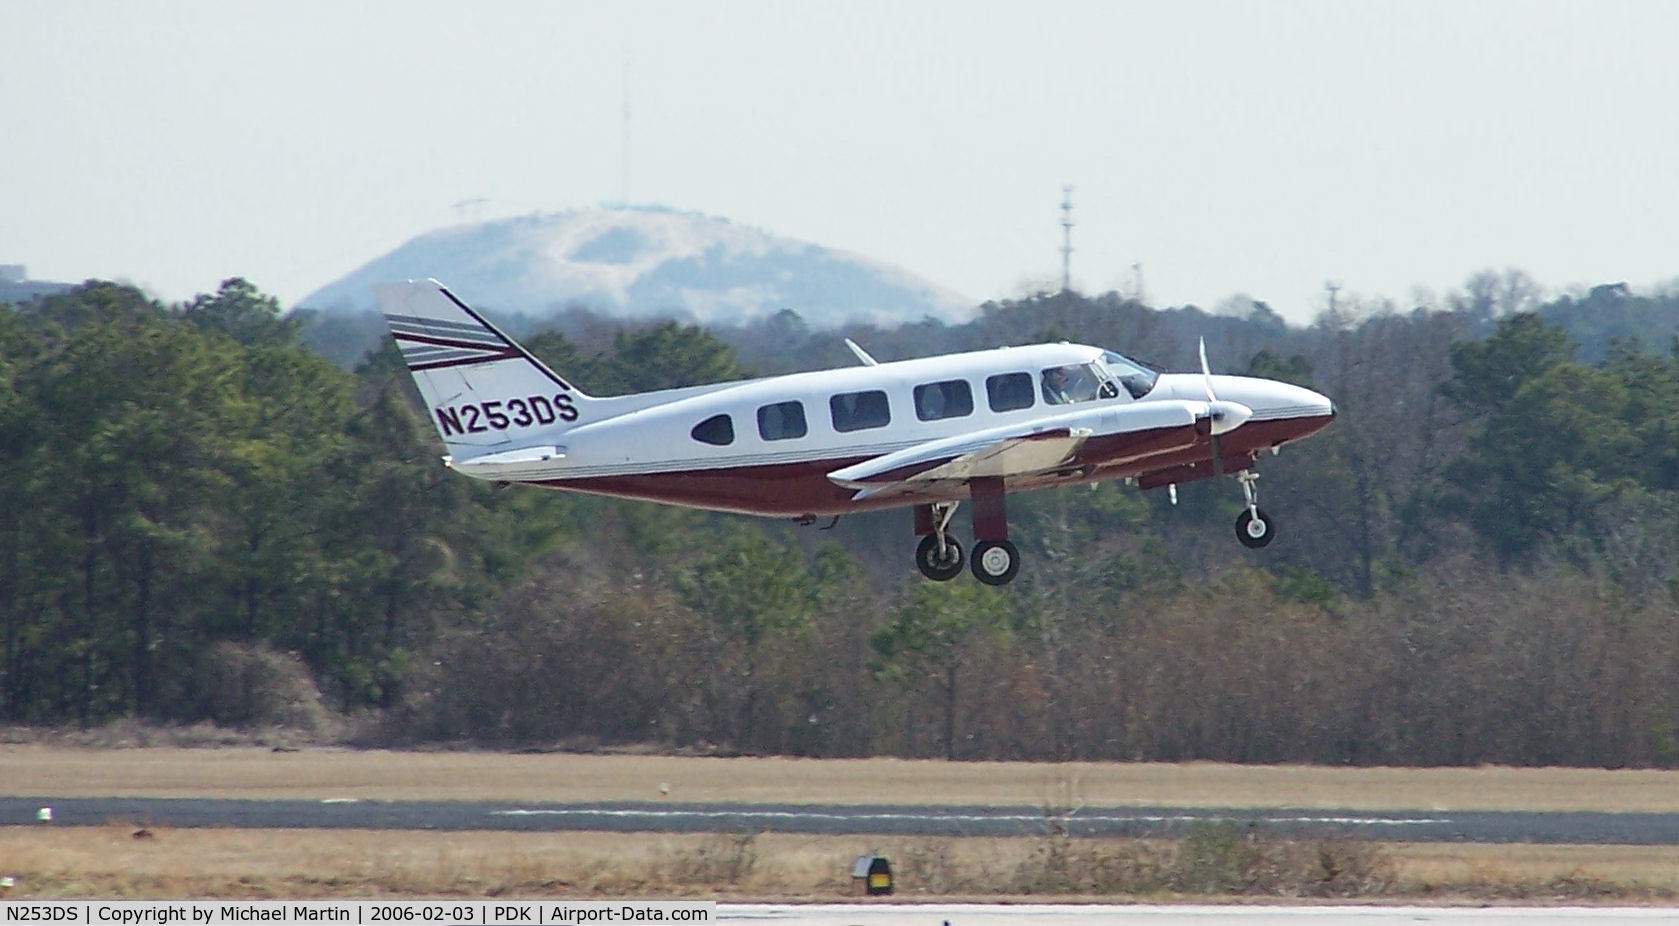 N253DS, 1980 Piper PA-31-350 Chieftain C/N 31-8052142, Departing PDK - Starting to rotate gear.